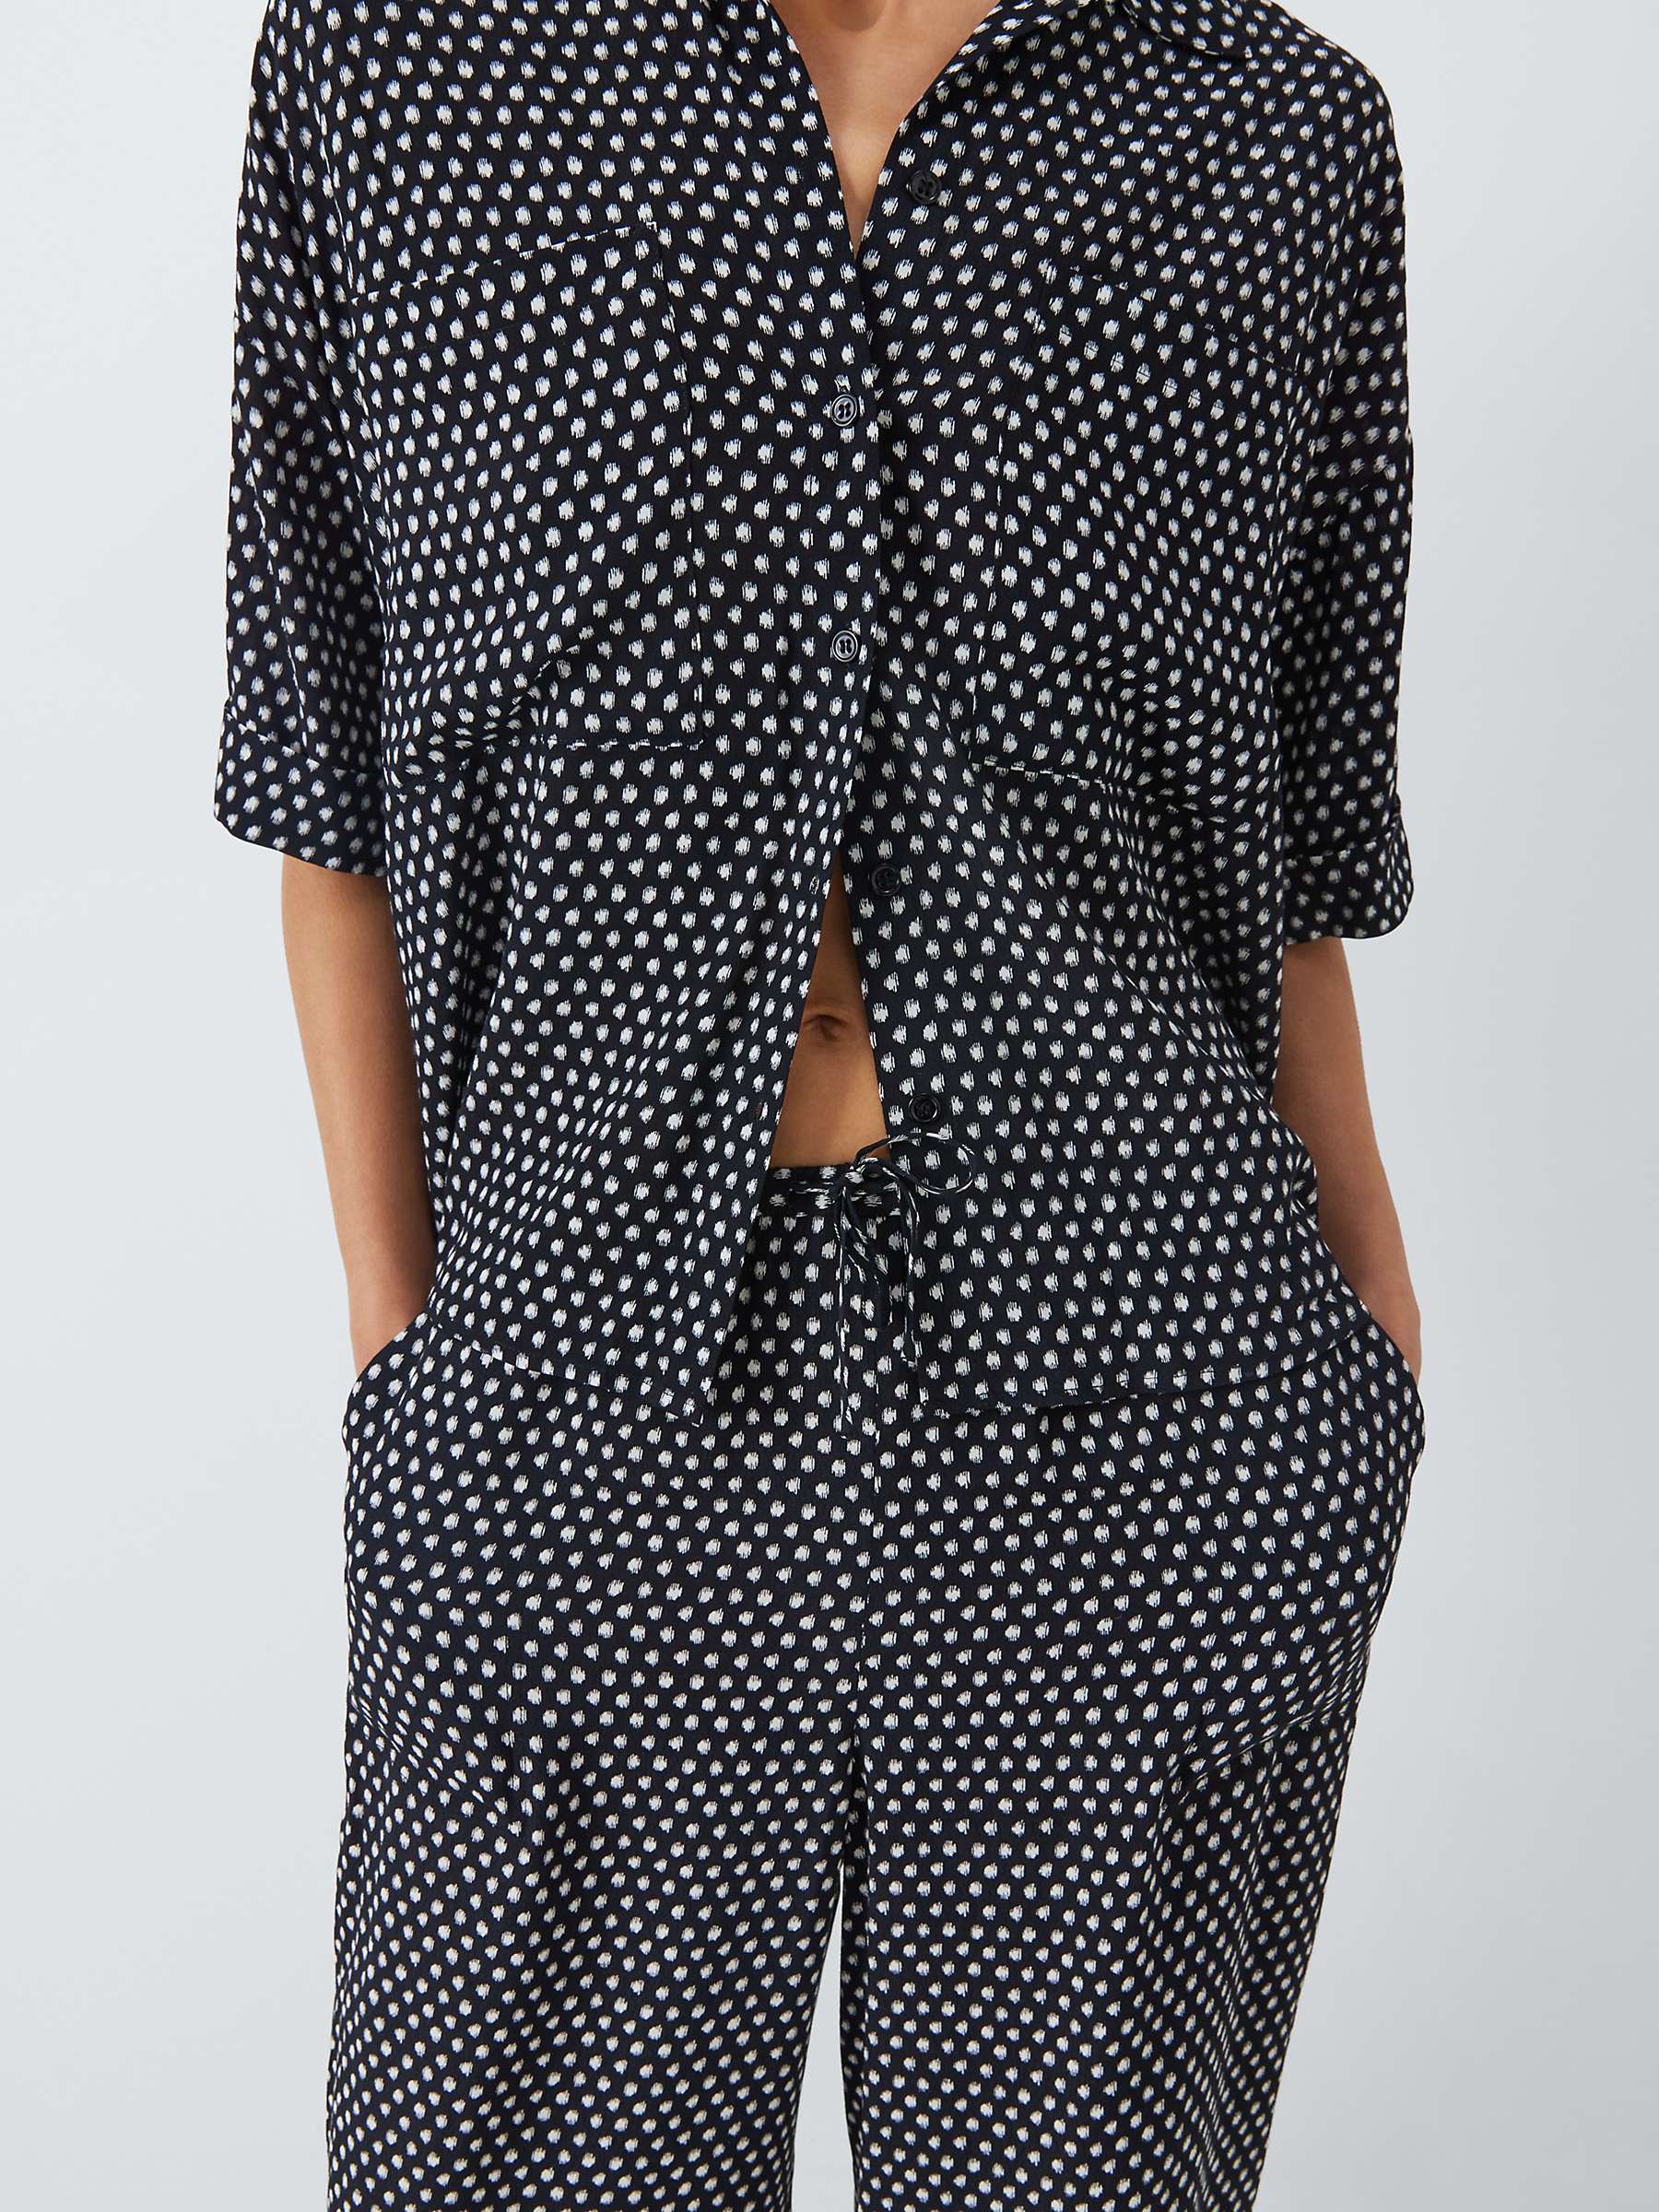 Buy John Lewis Abstract Spot Trousers Online at johnlewis.com